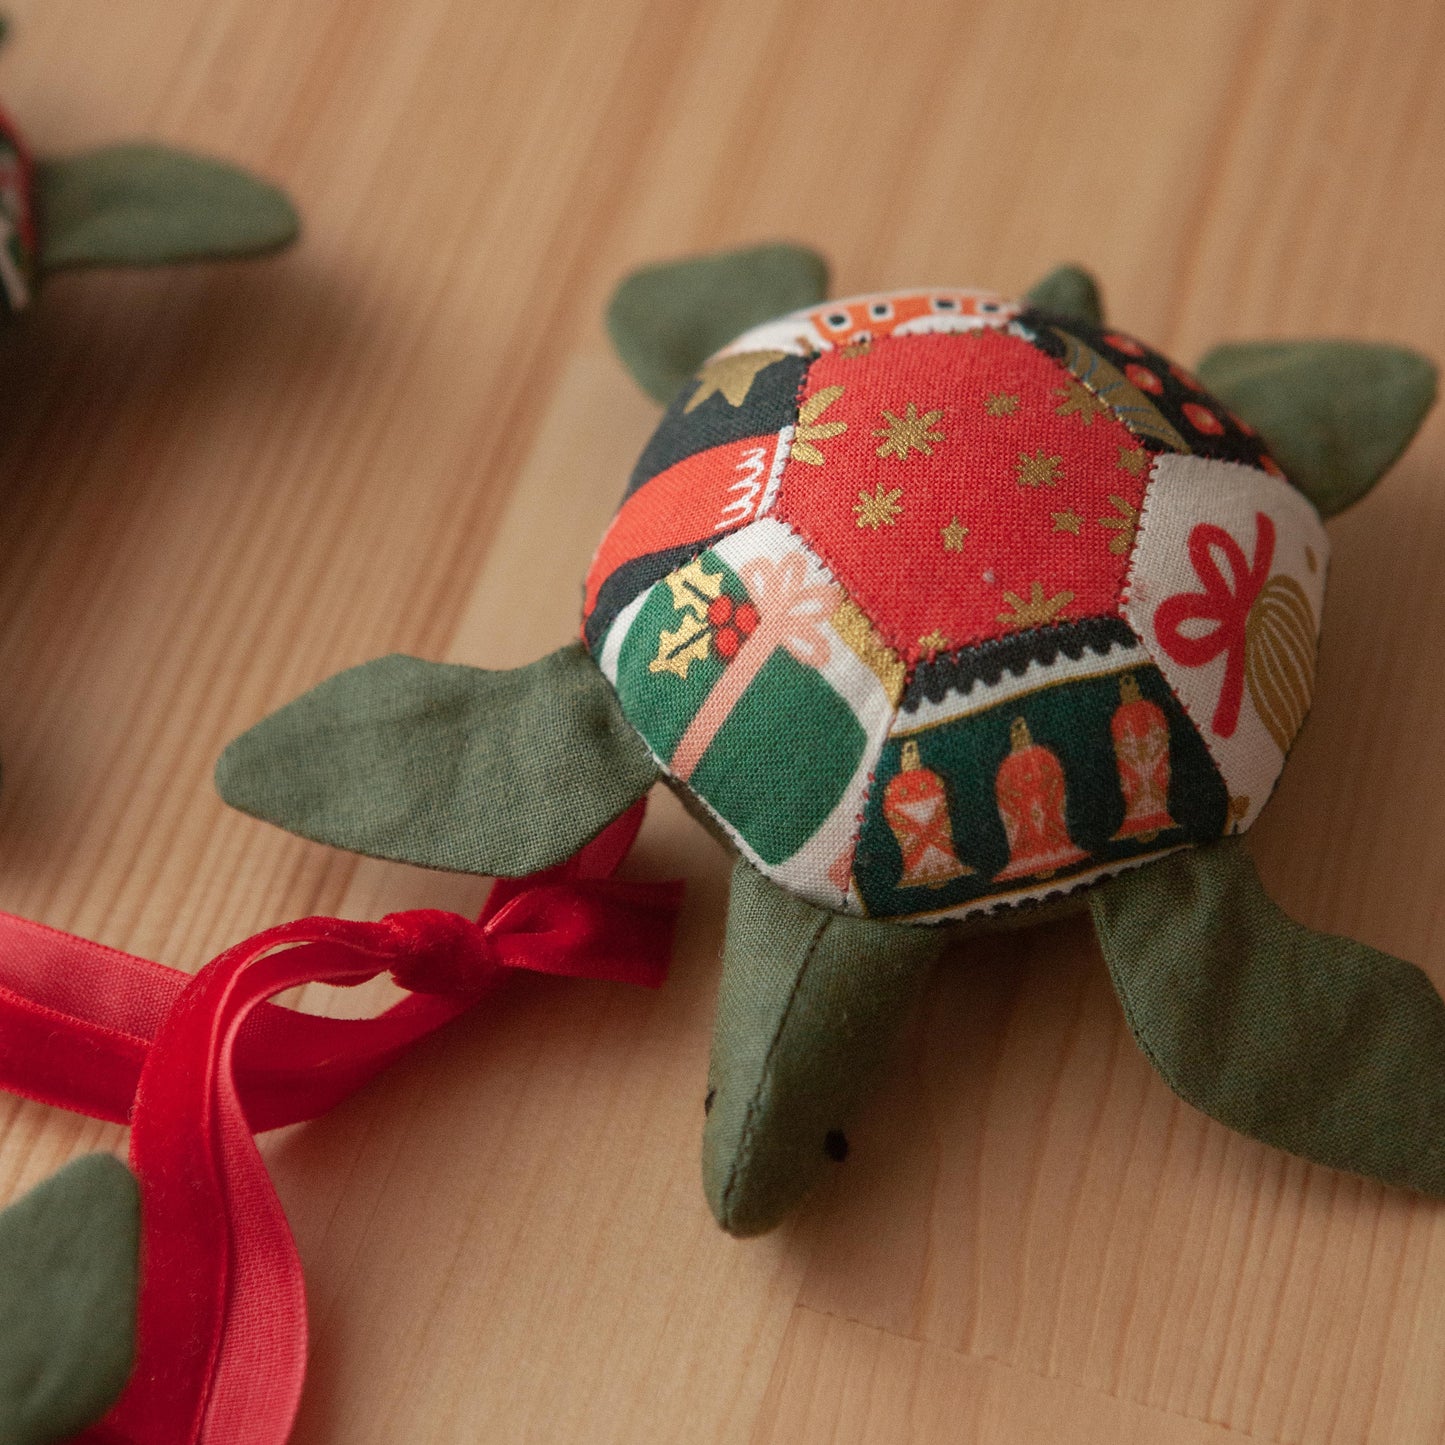 Turtle Toys / Christmas Ornaments